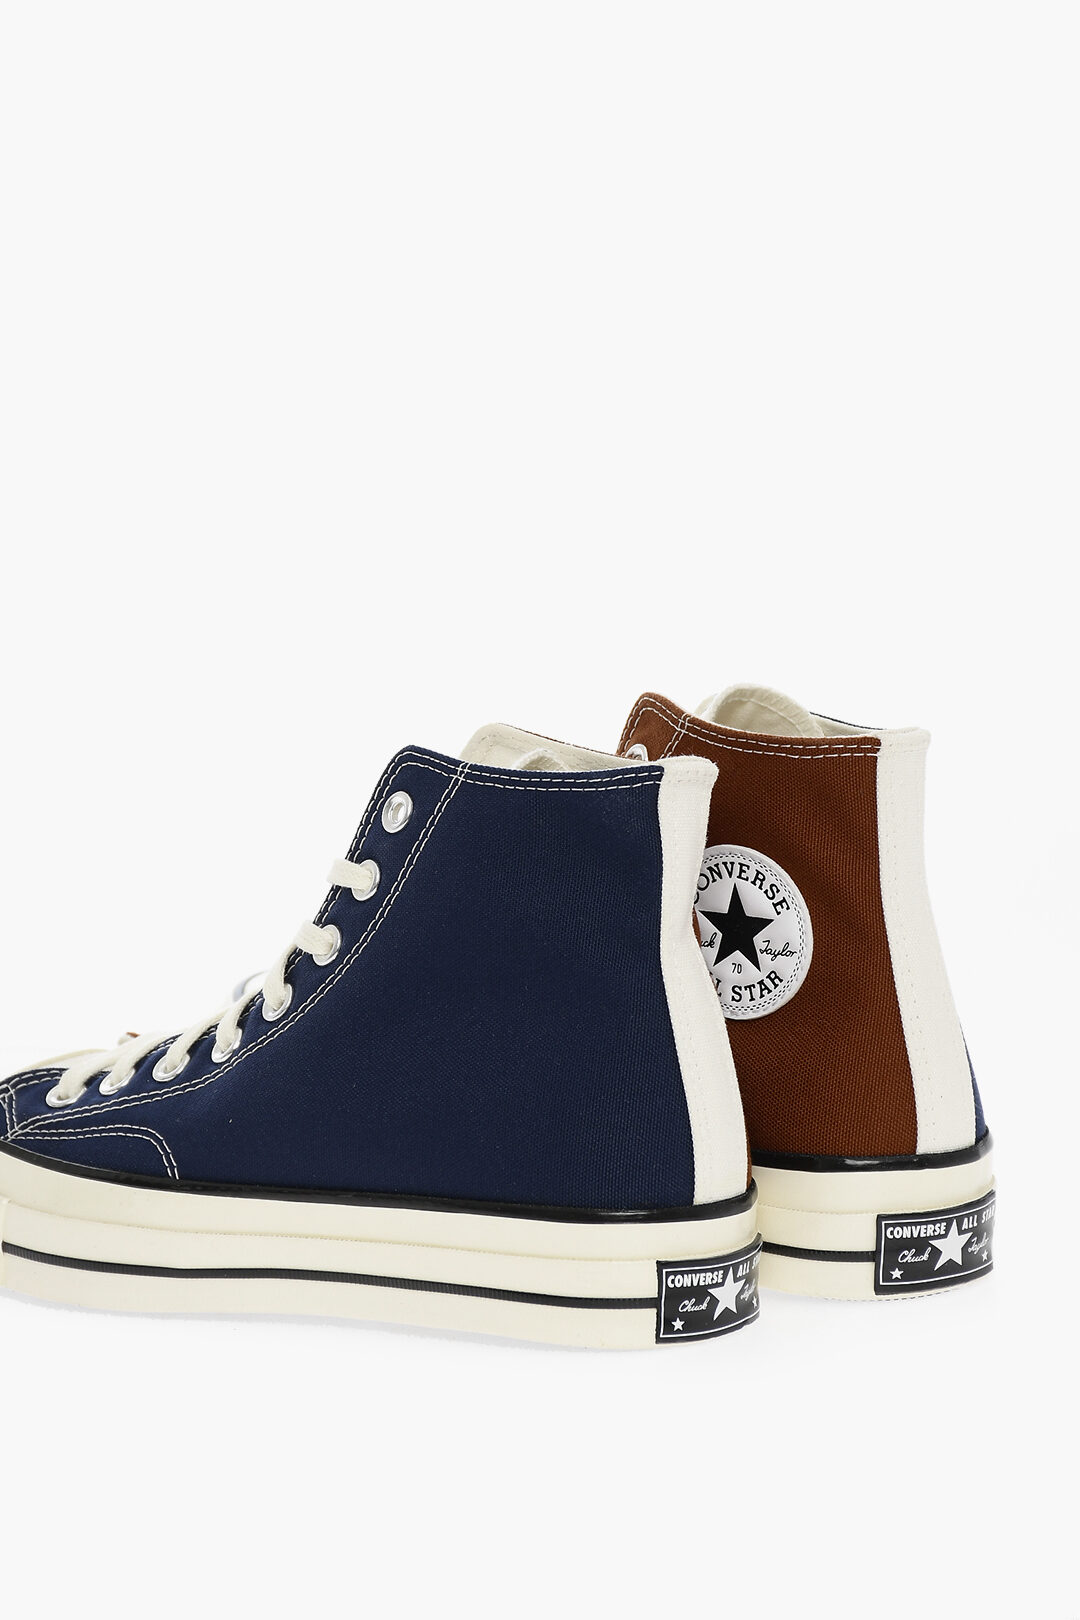 Converse ALL STAR CHUCK TAYLOR Color 70 Sneakers men - Glamood Outlet